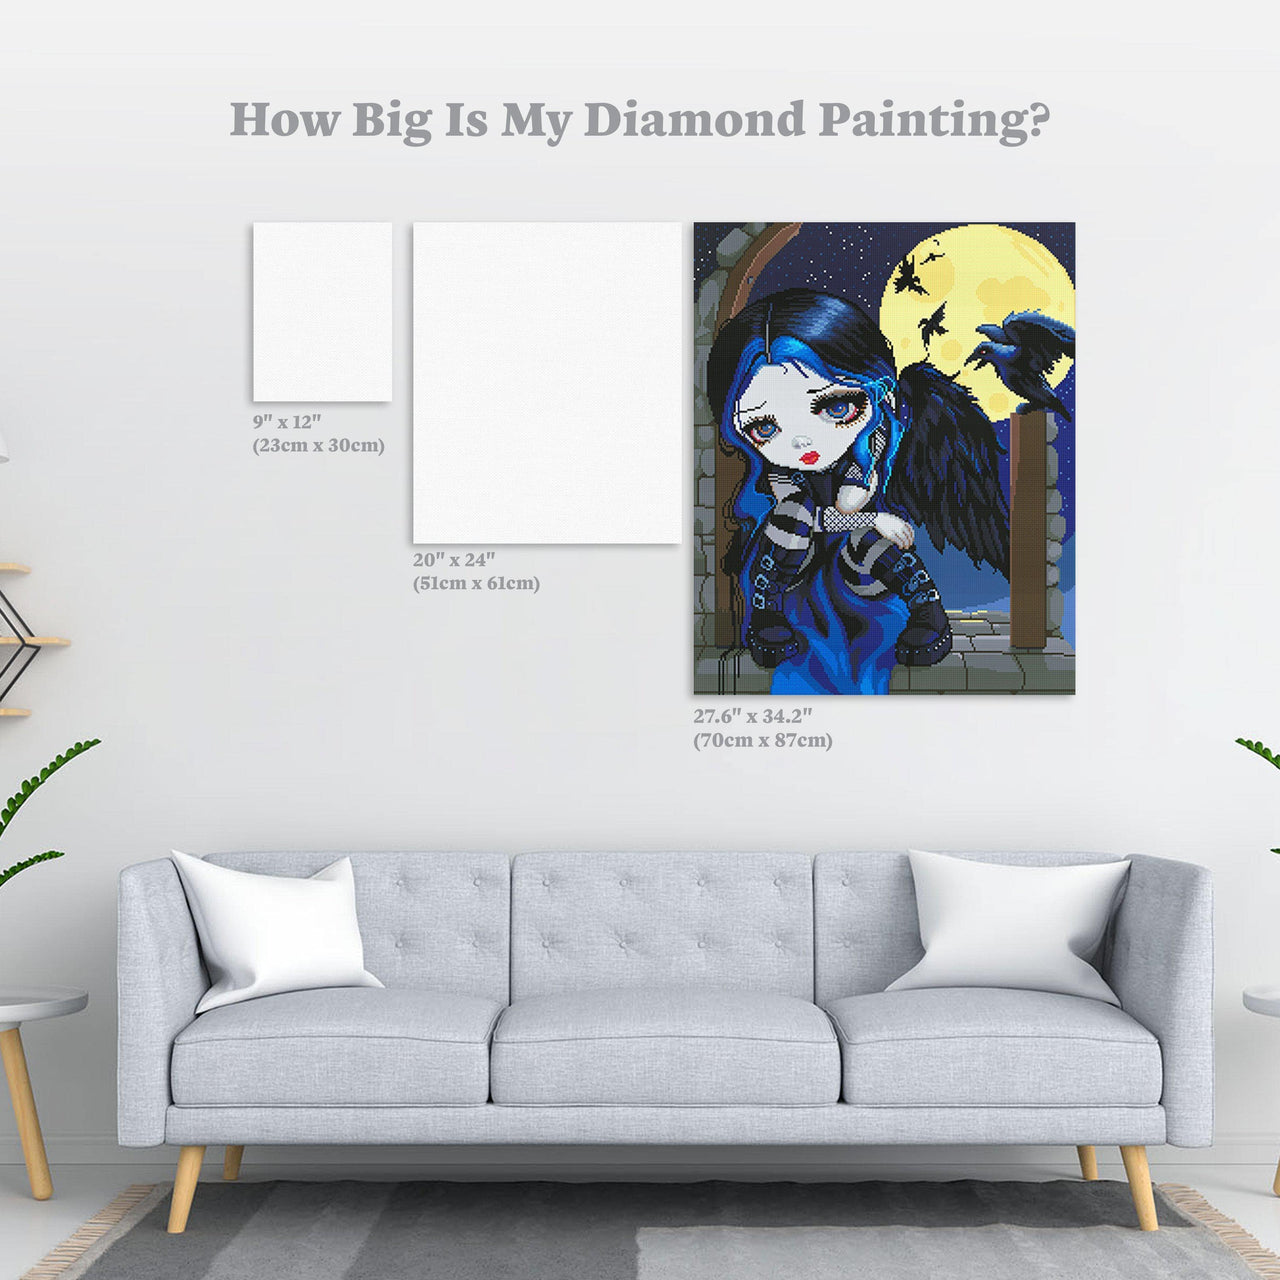 Diamond Painting The Whispered Word Lenore 27.6" x 34.2″ (70cm x 87cm) / Square with 35 Colors including 2 ABs